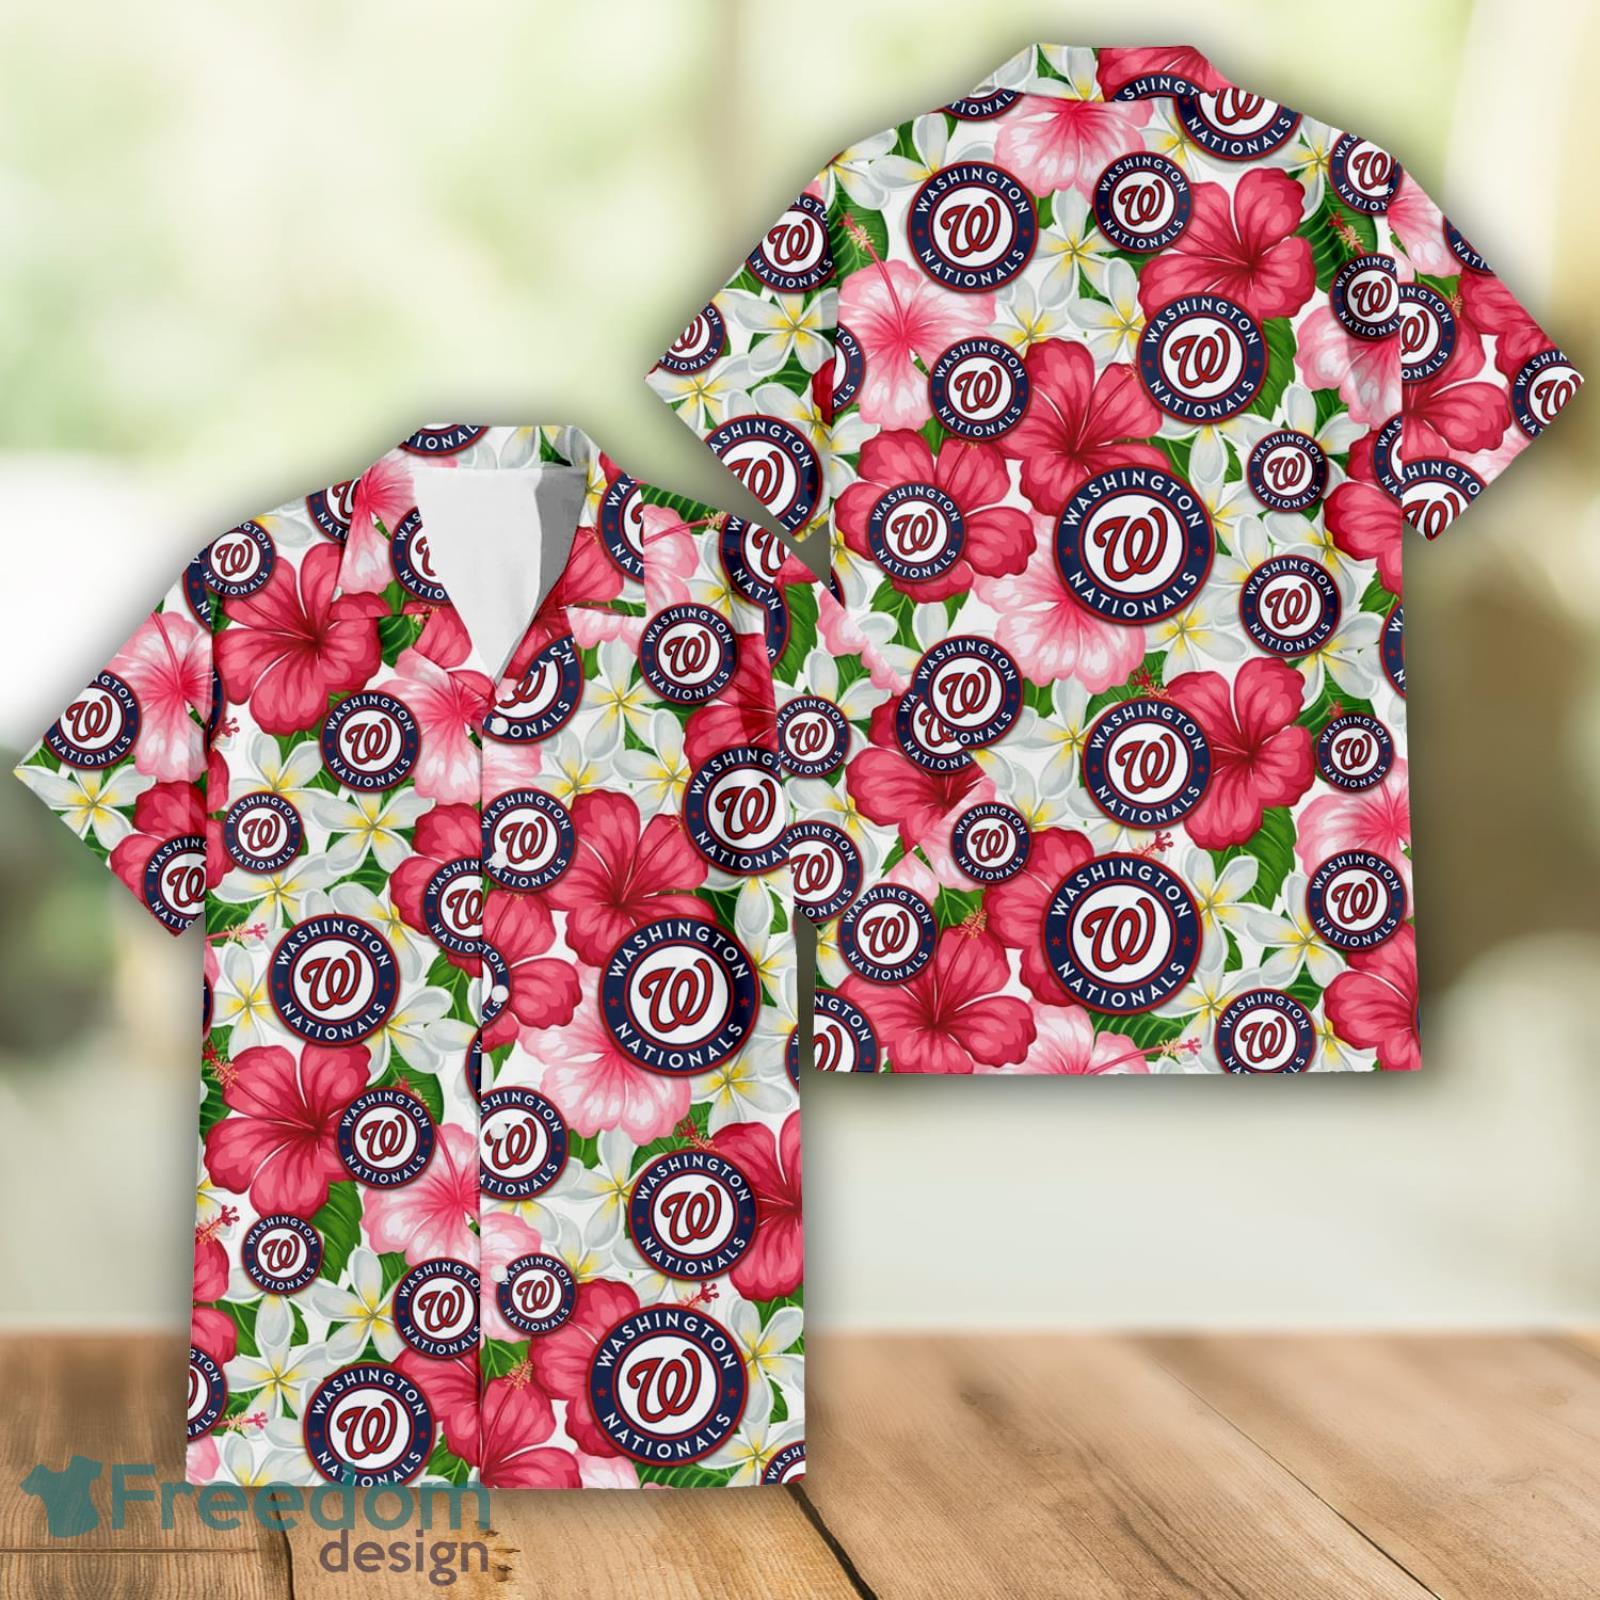 Houston Astros White Hibiscus Floral Tropical 3D Hawaiian Shirt For Men And  Women